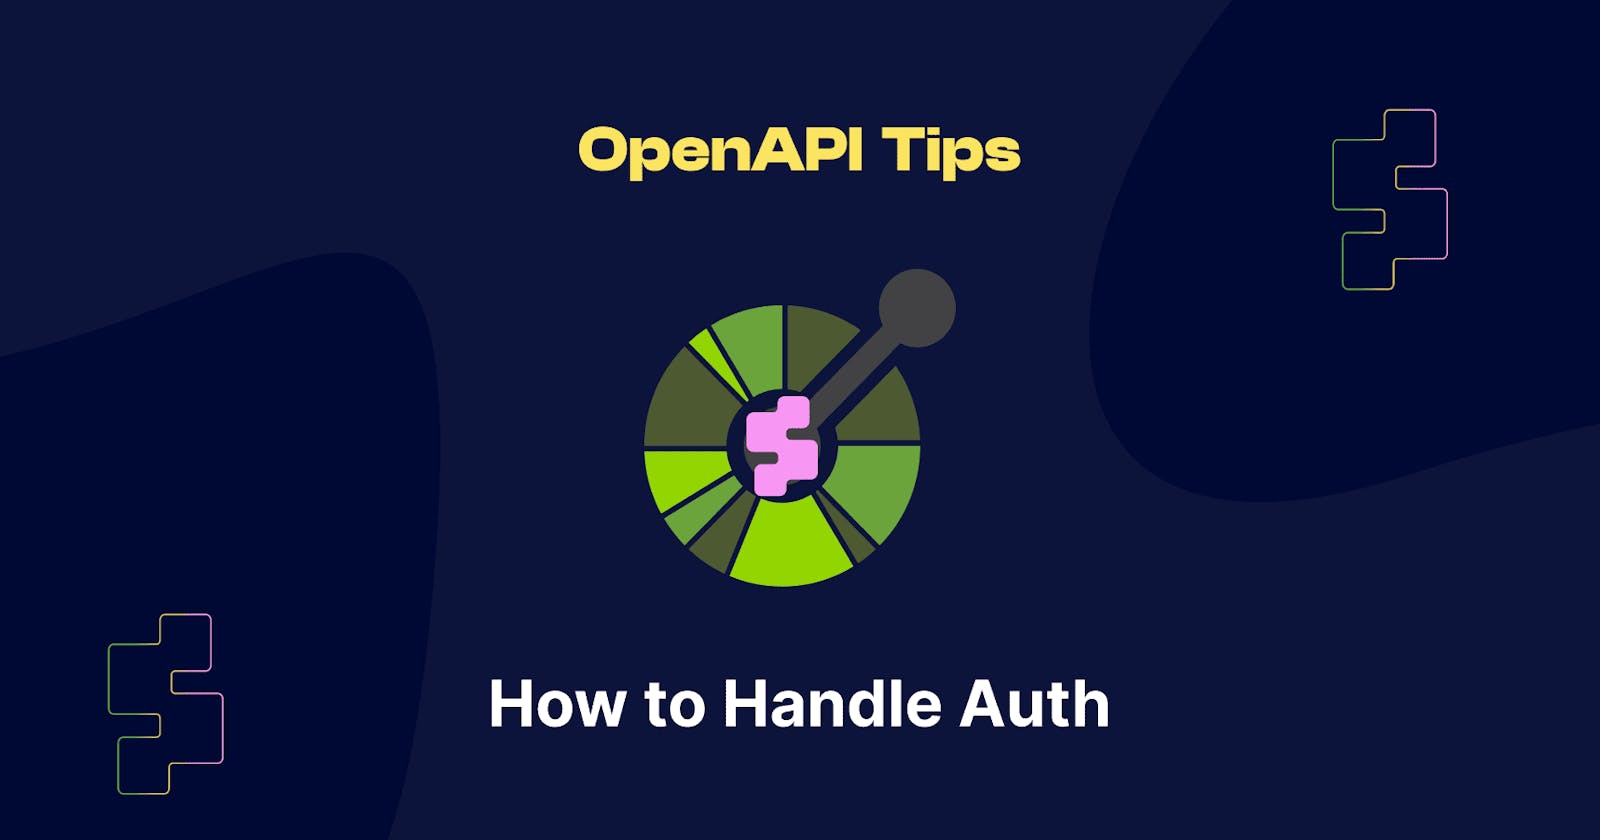 OpenAPI Tips - How to Handle Auth